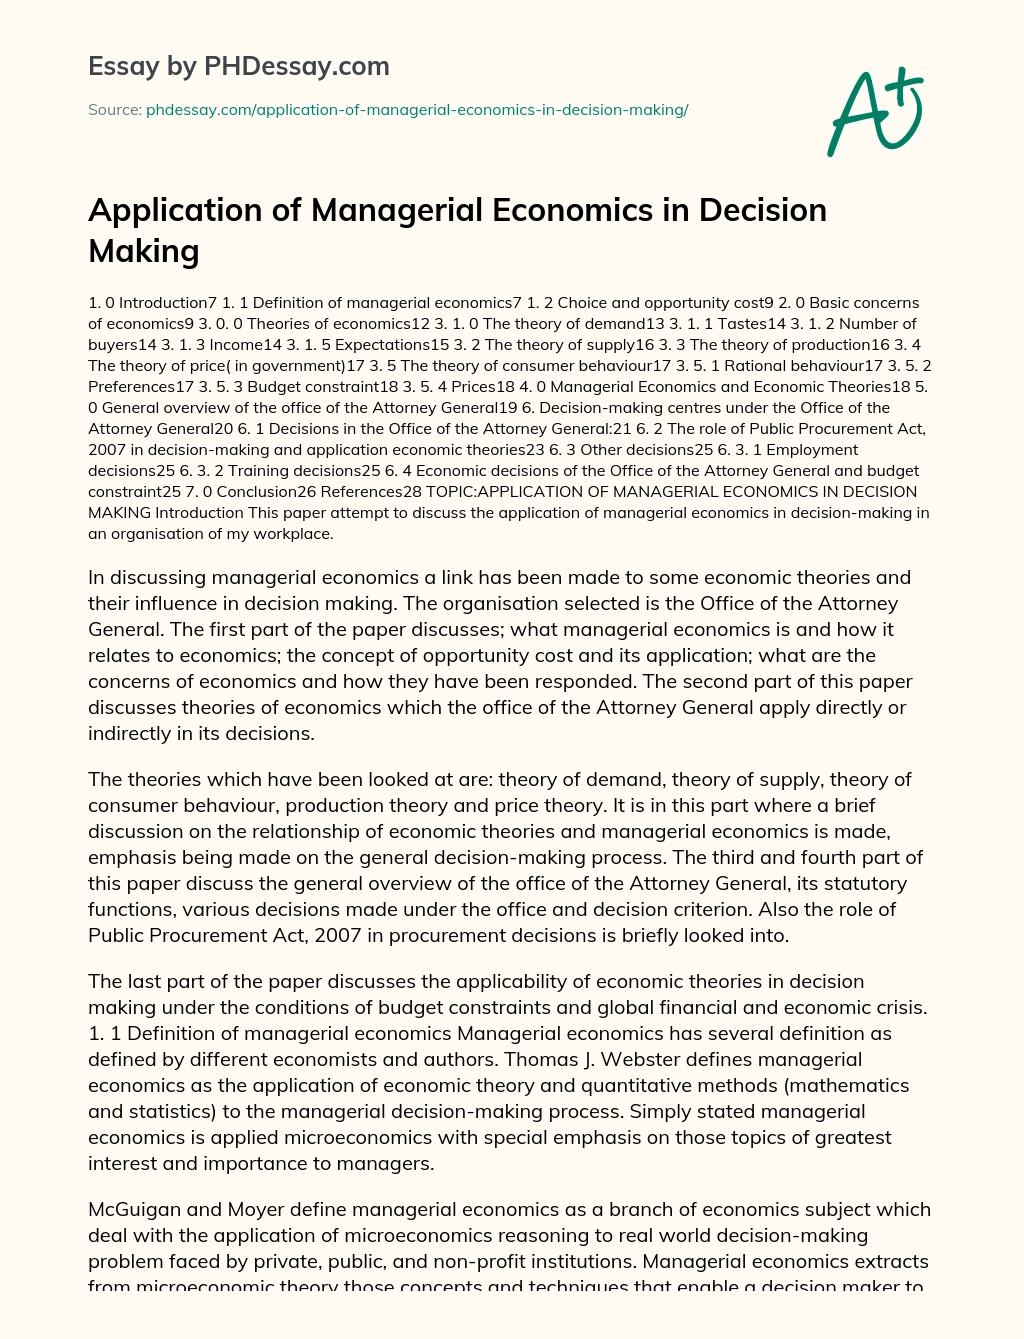 Application of Managerial Economics in Decision Making essay